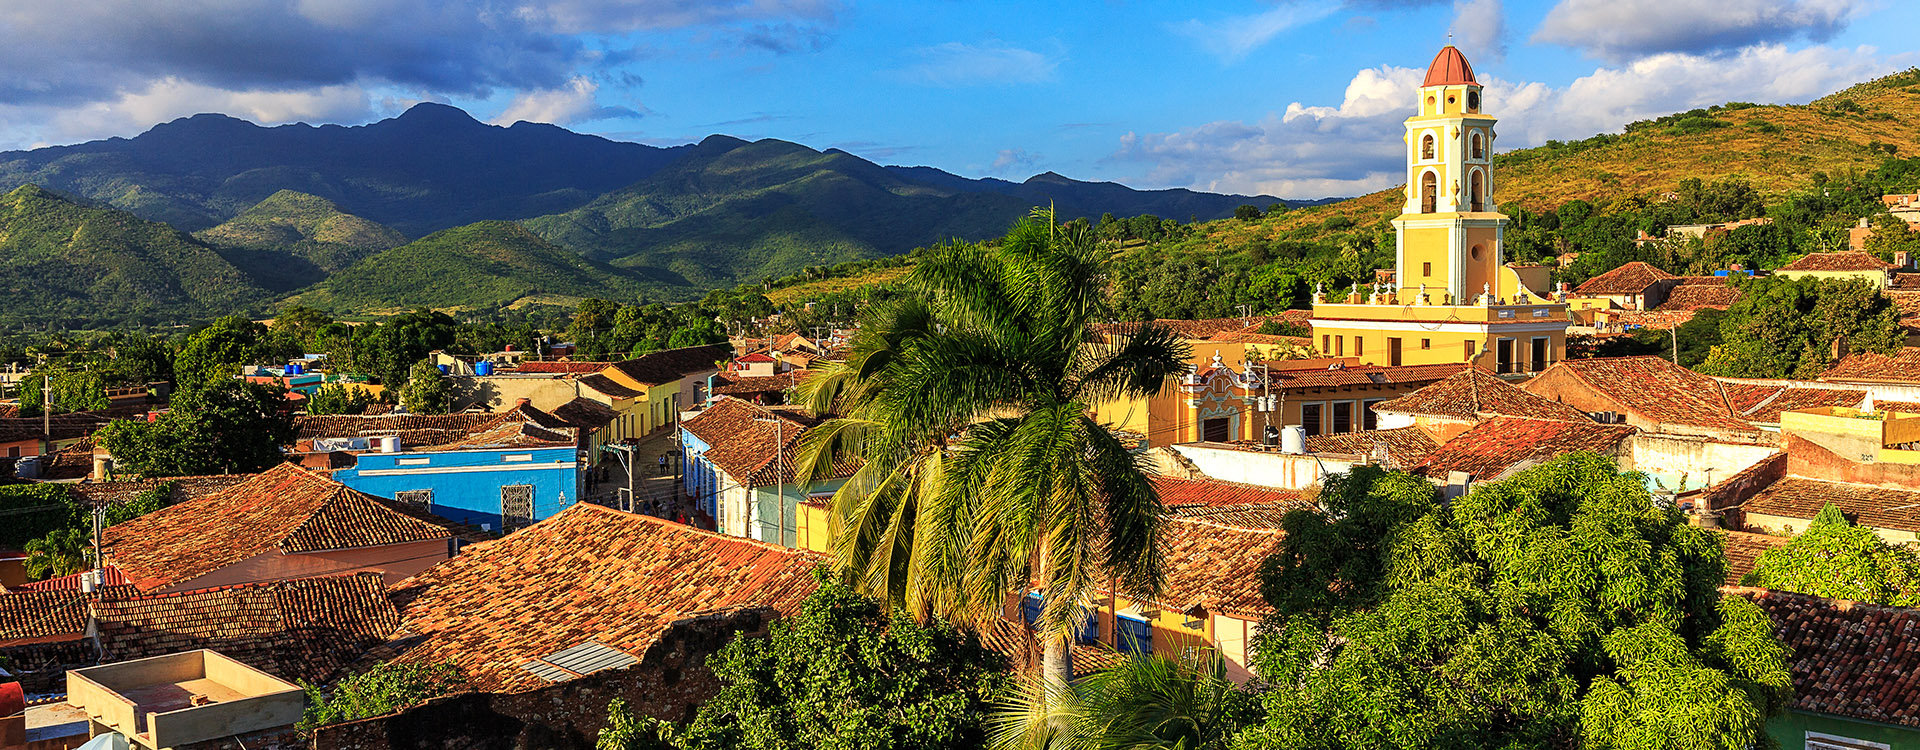 View over the city Trinidad on Cuba